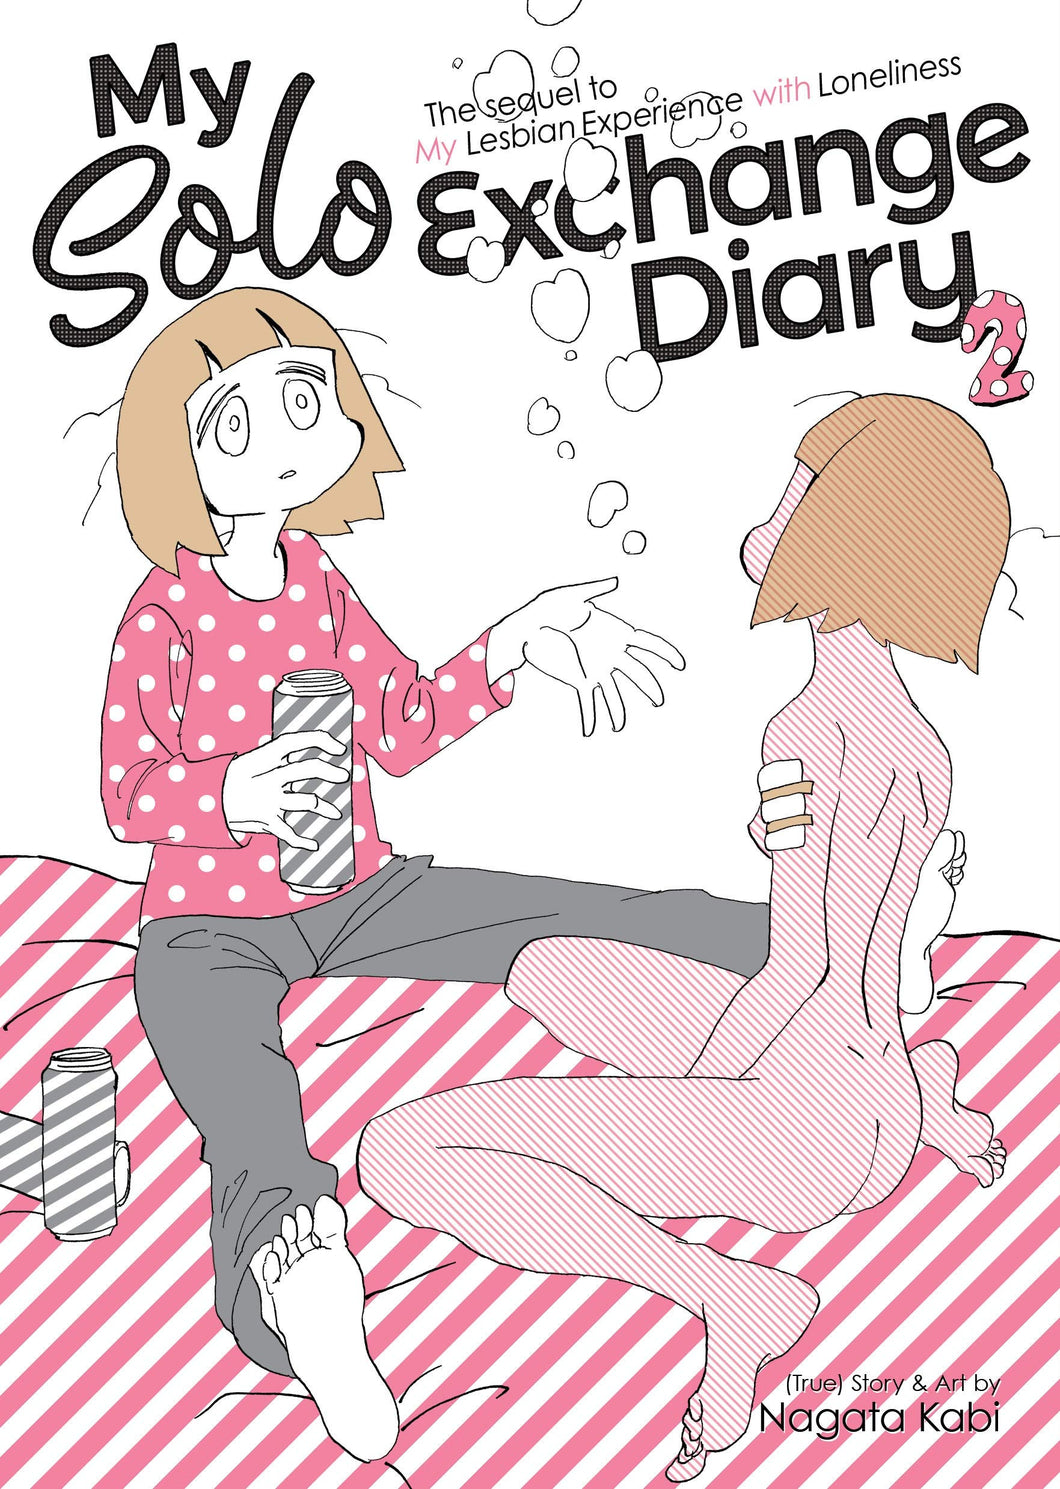 My Solo Exchange Diary Vol. 2 (My Lesbian Experience with Loneliness) by Nagata Kabi